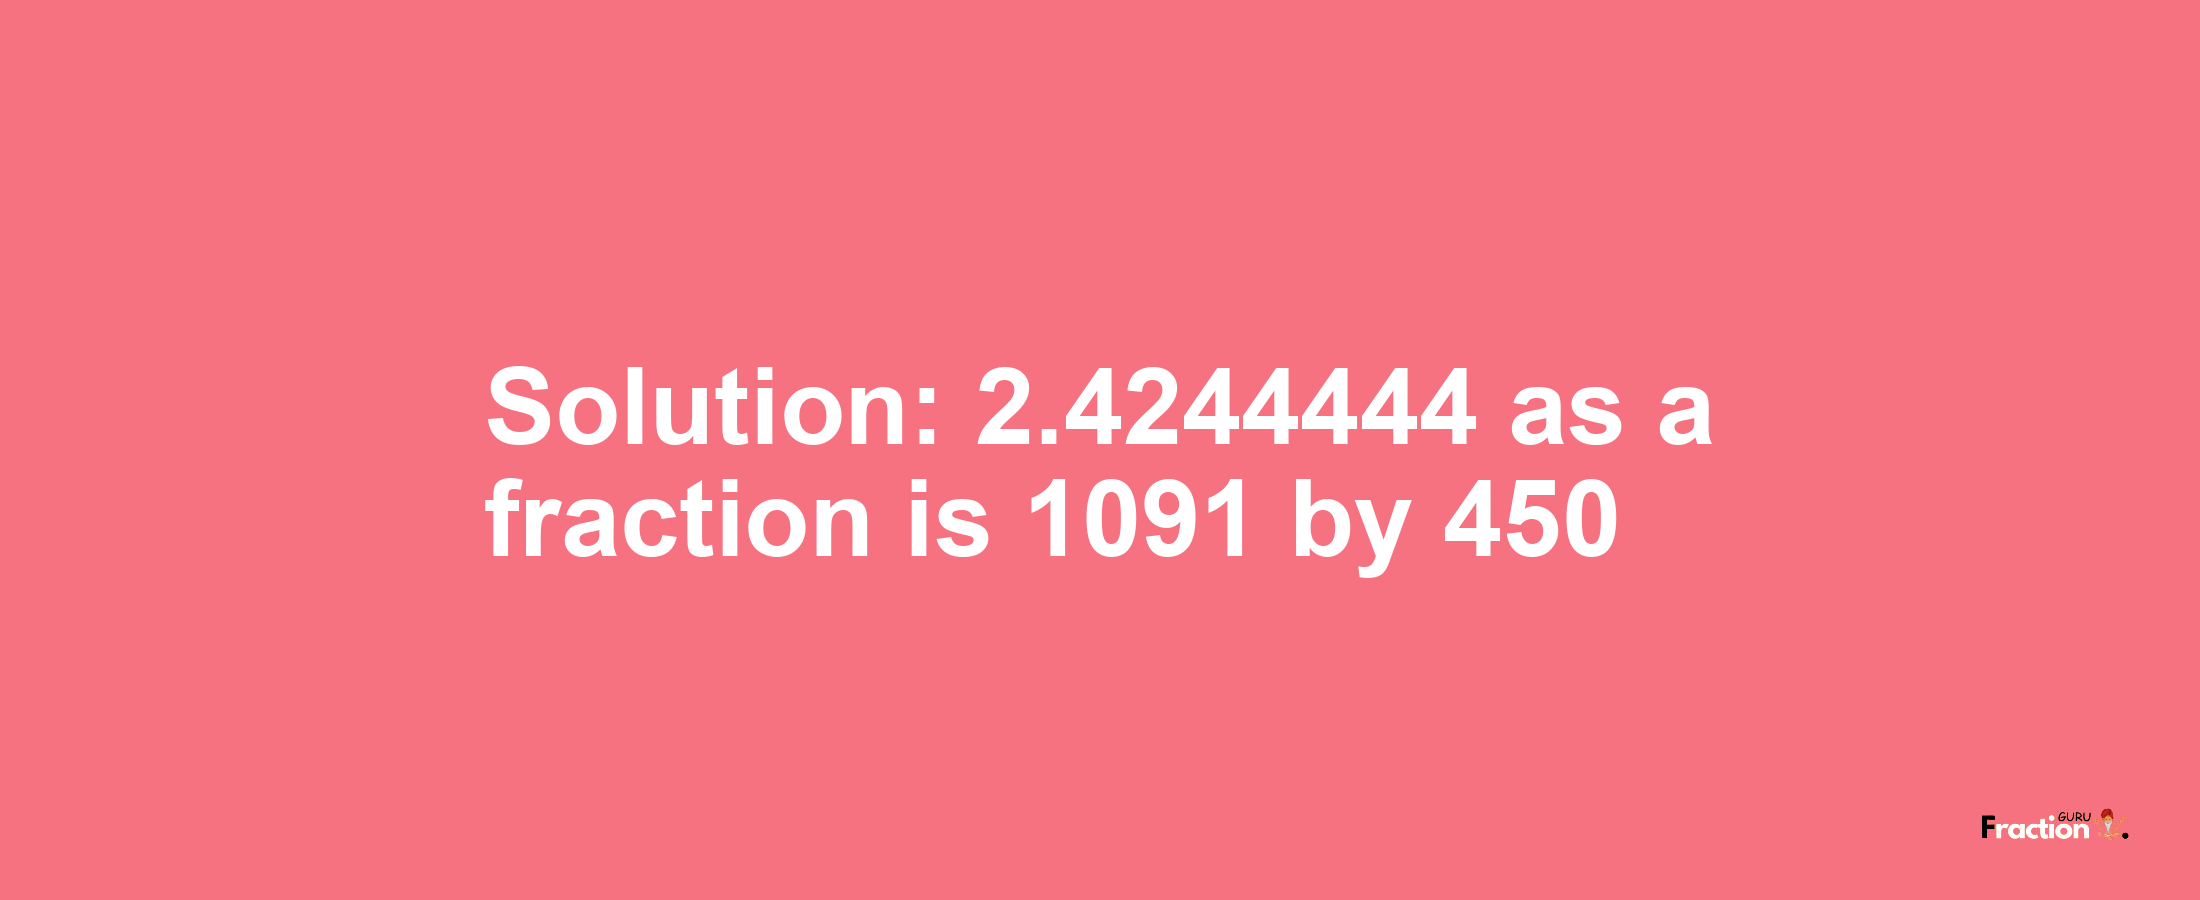 Solution:2.4244444 as a fraction is 1091/450